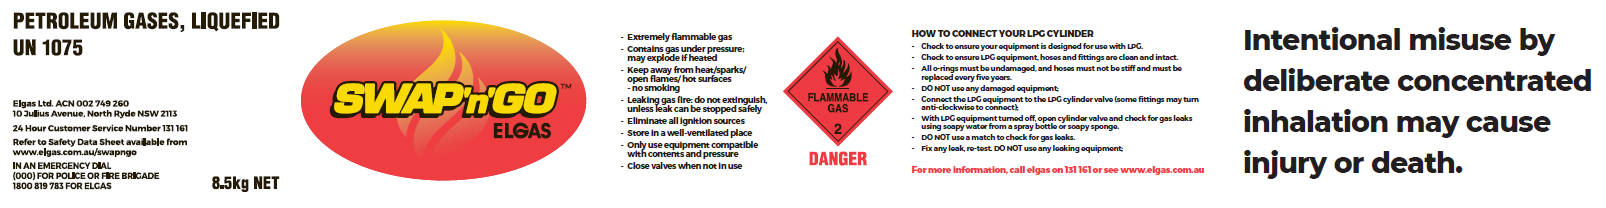 Compliant gas cylinder label - Elgas